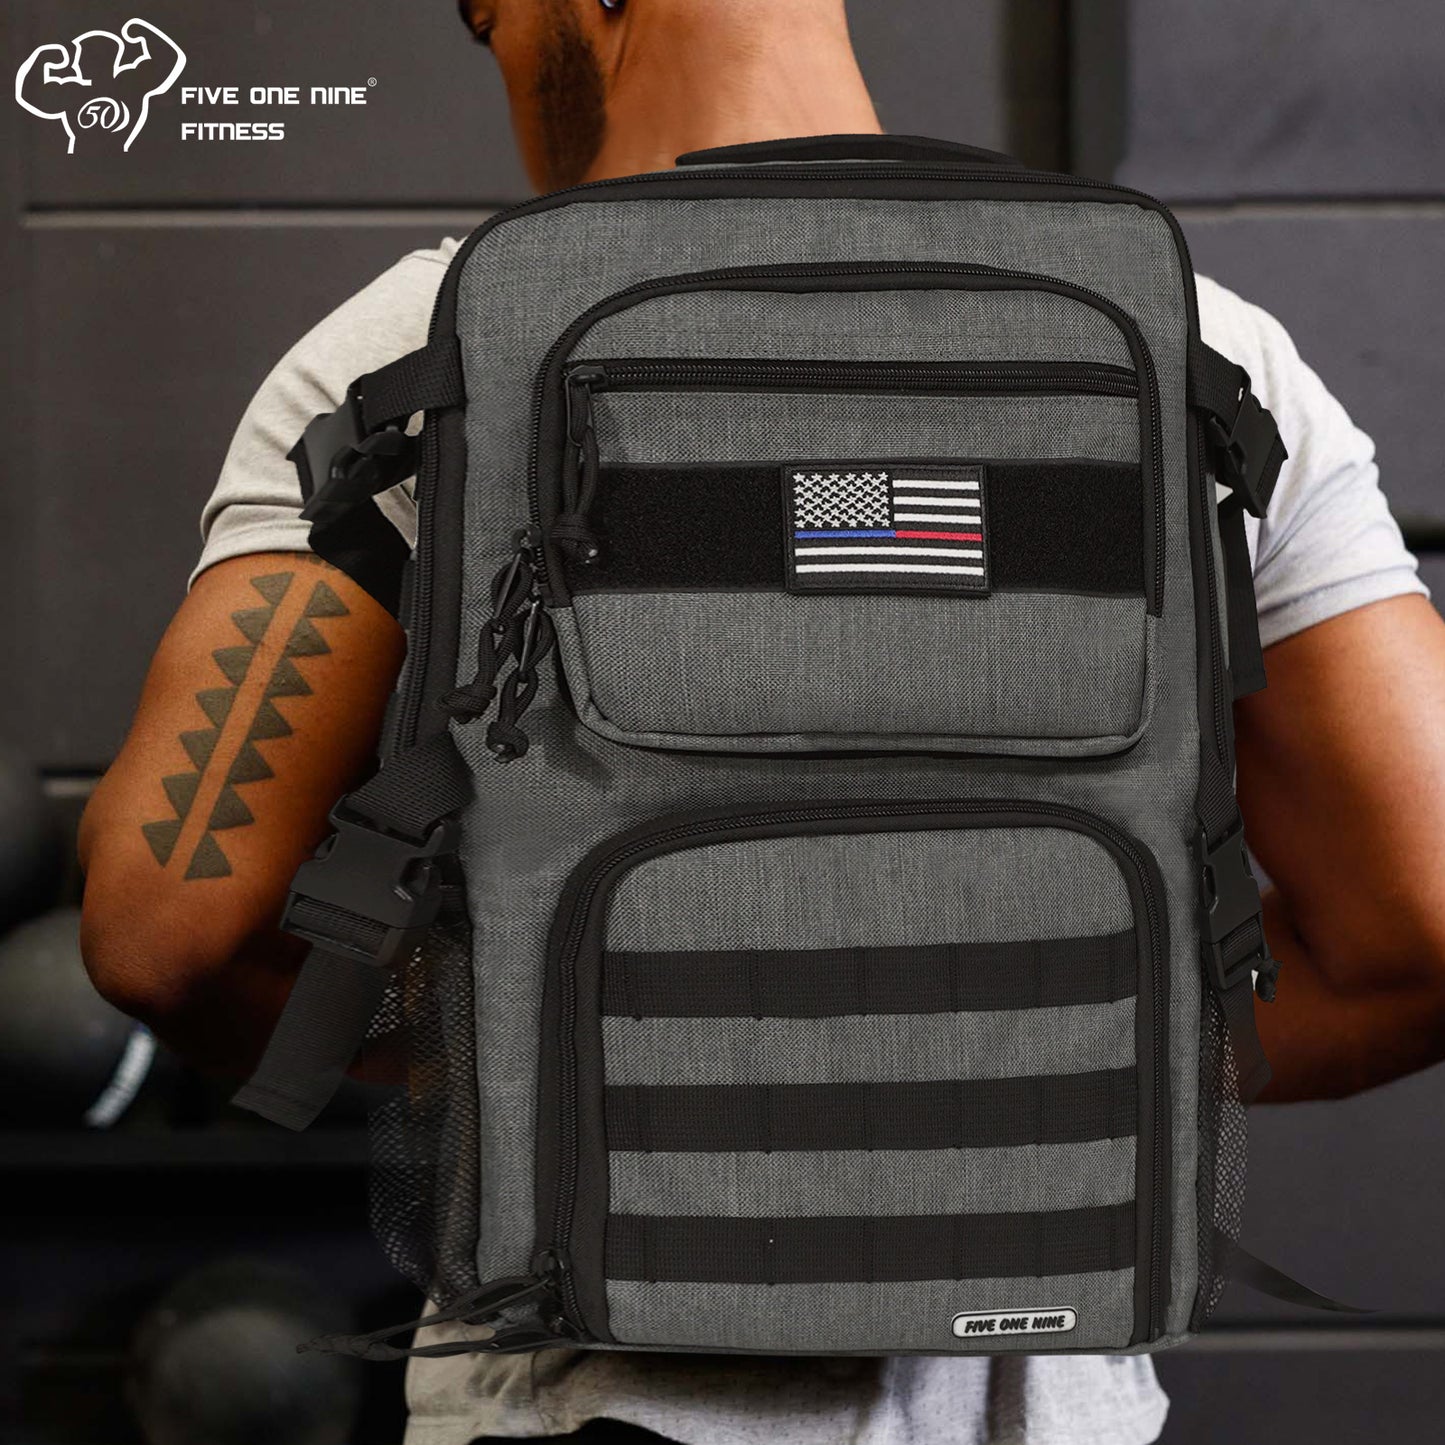 Tactical Meal Prep Backpack,519 Fitness Insulated Lunch Backpack with Removable Meal Compartment,16 Hours Insulation,Hiking Lunch Rucksack with Molle,Heavy Duty Hydration Backpack (Grey)